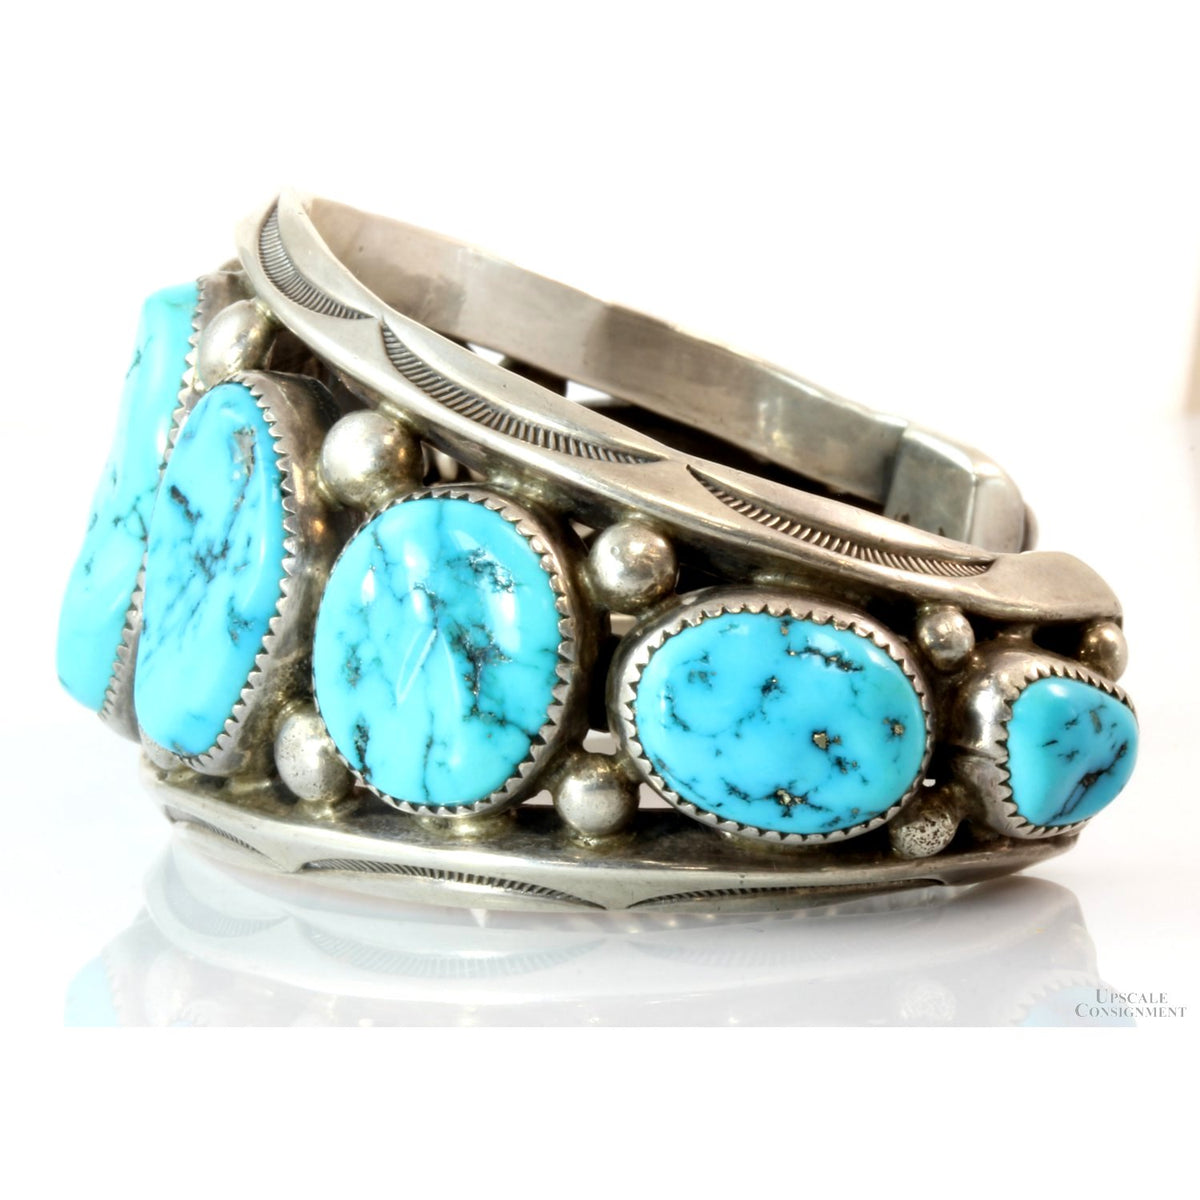 Vintage 9-Stone Turquoise Sterling Silver Cuff by Navajo Silversmith Orville Tsinnie